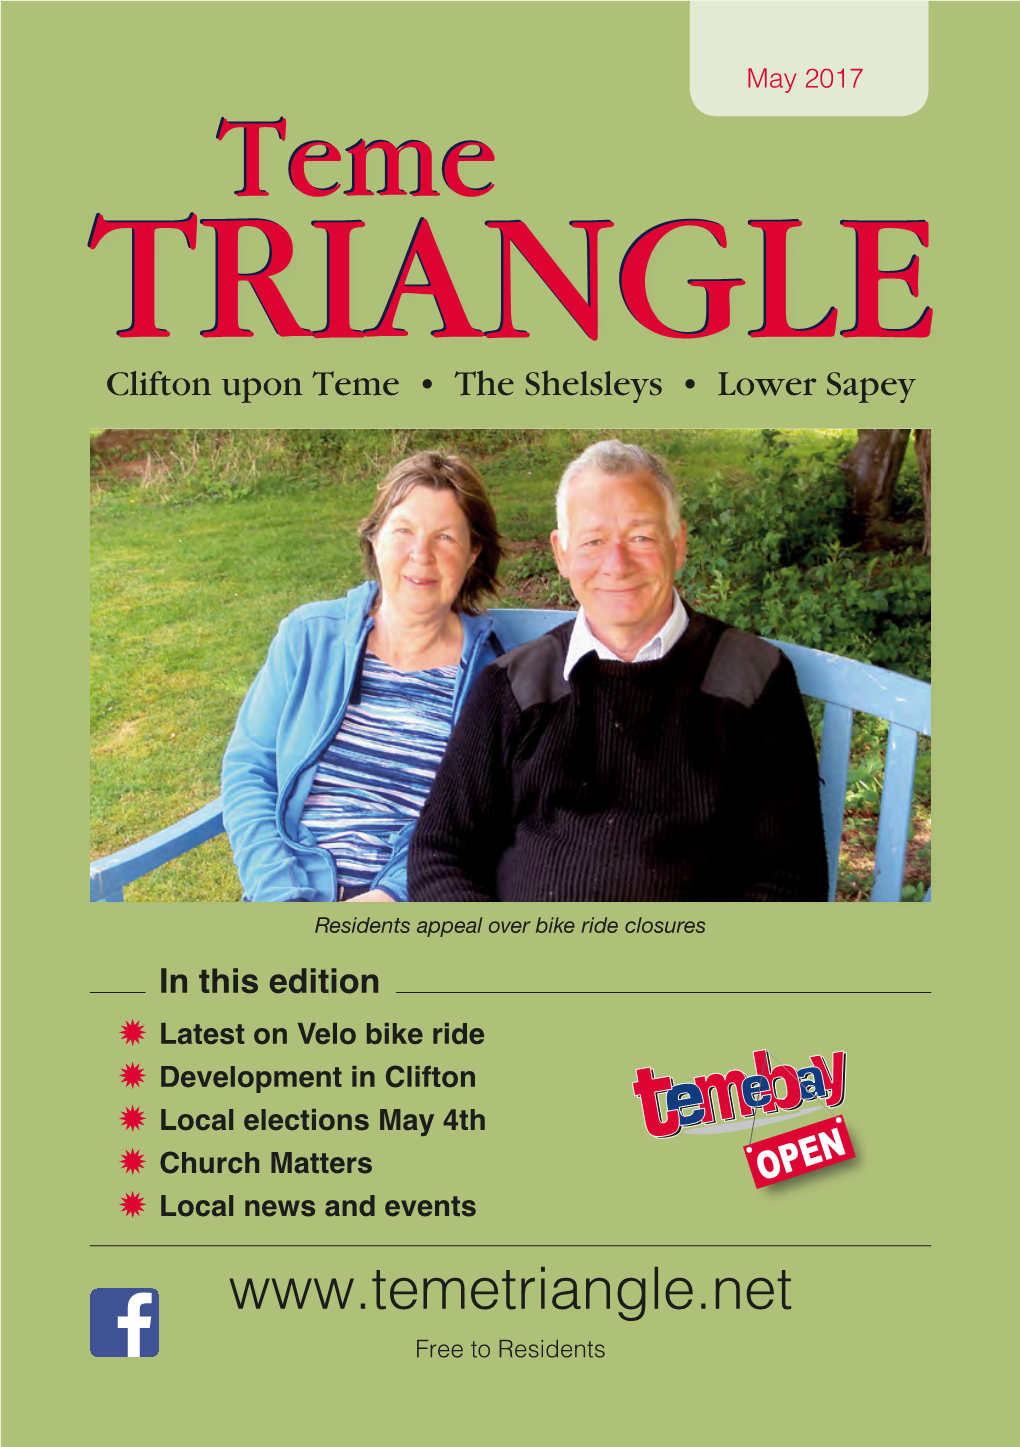 May 2017 Temeteme TRIANGLETRIANGLE Clifton Upon Teme • the Shelsleys • Lower Sapey